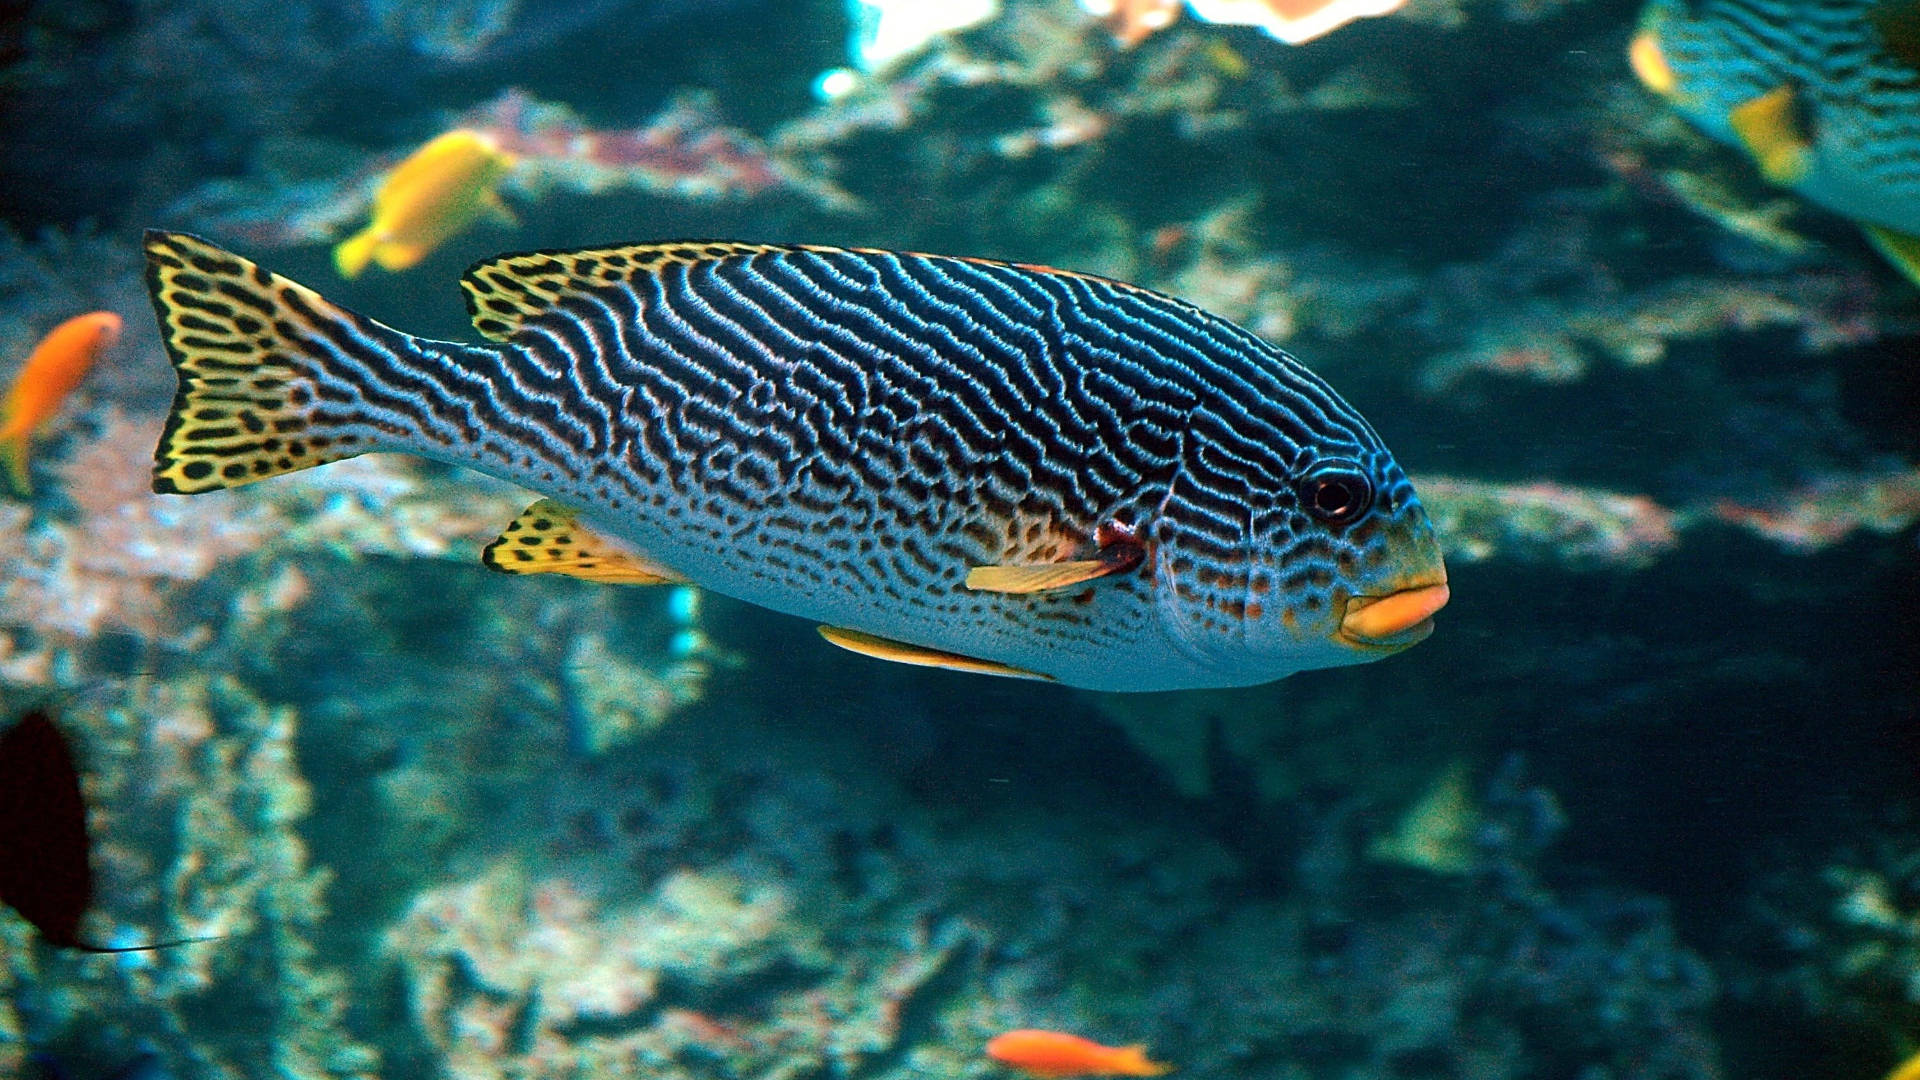 "Gorgeous Yellow-banded Sweetlips Tropical Fish Gliding Through Vibrant Underwater Realm" Wallpaper